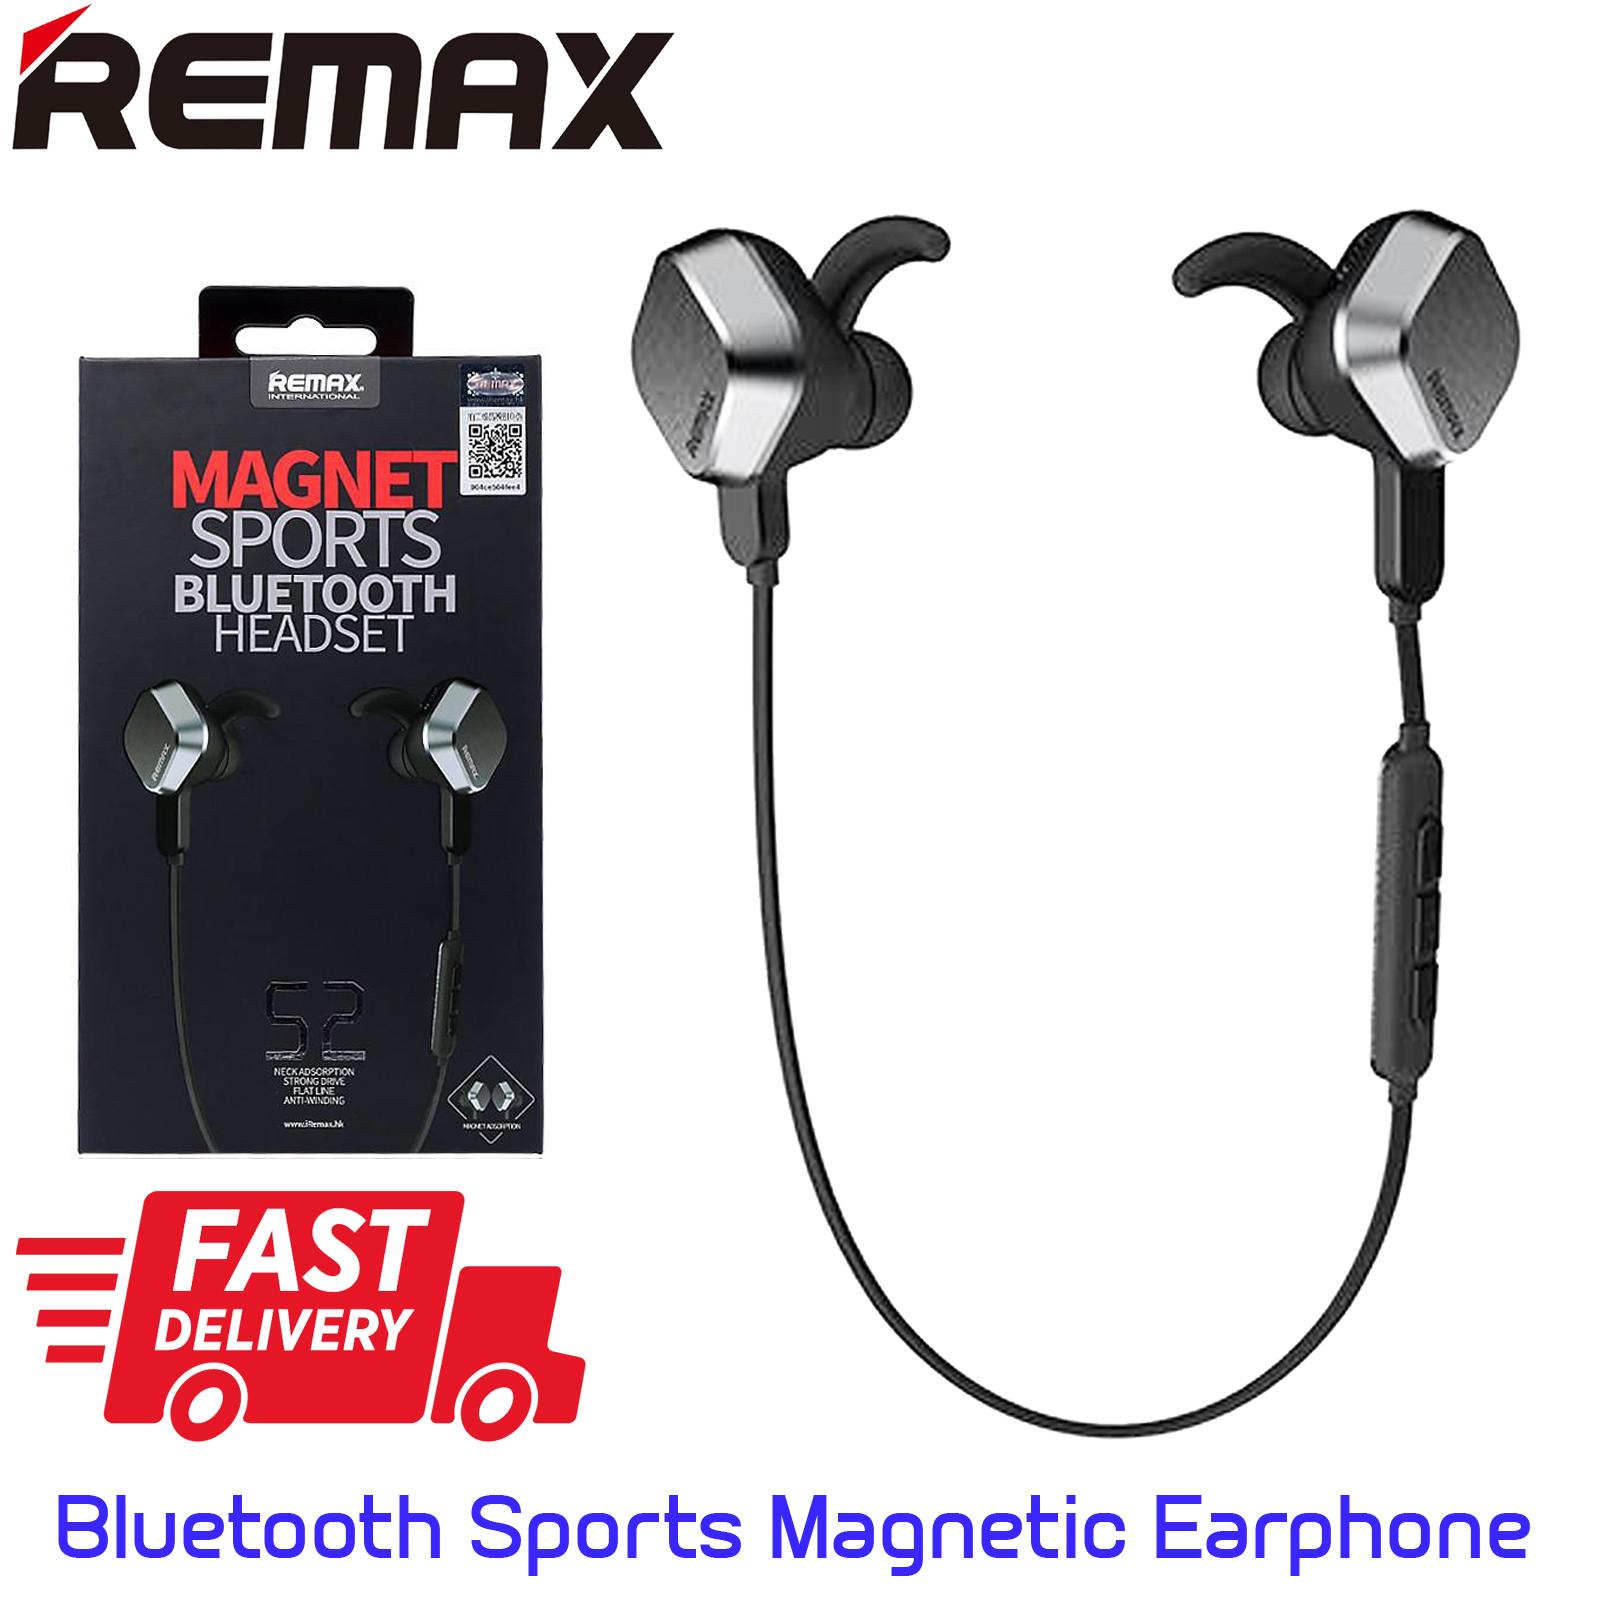 REMAX RM S2 Sports Magnet Headset